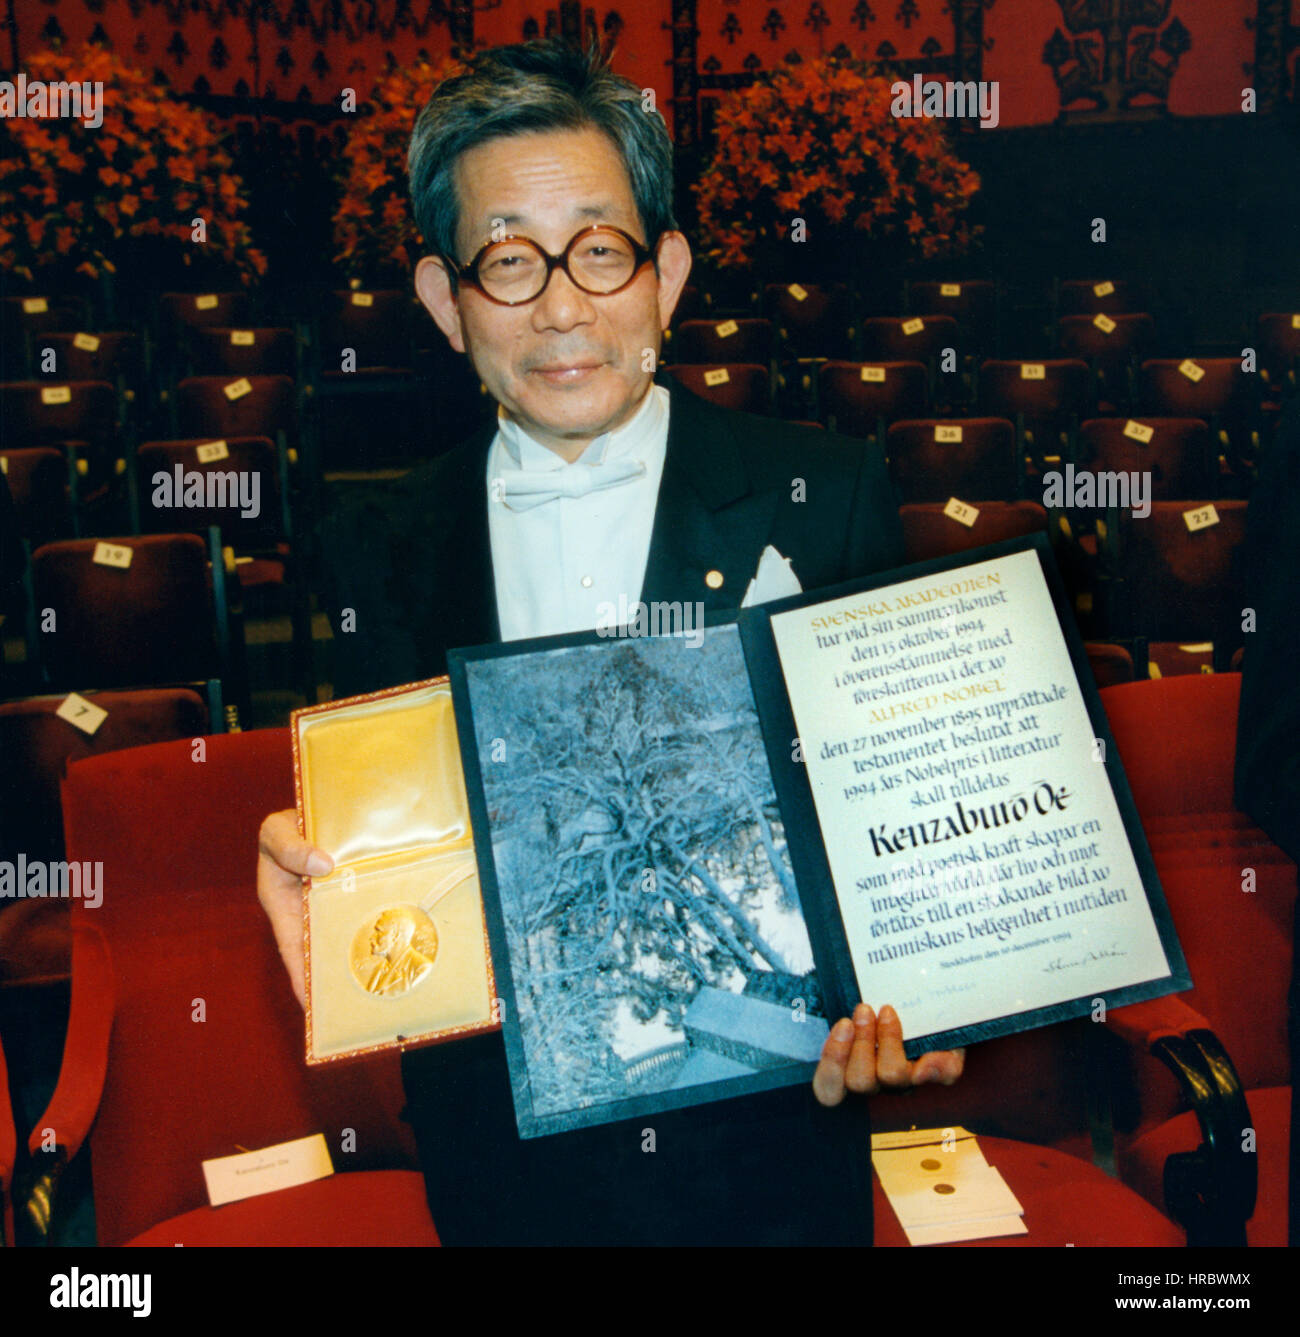 KENZABURE OE  Japanes author and Laureate for Nobel prize in literature with medal and diploma at the banquet 1994 Stock Photo